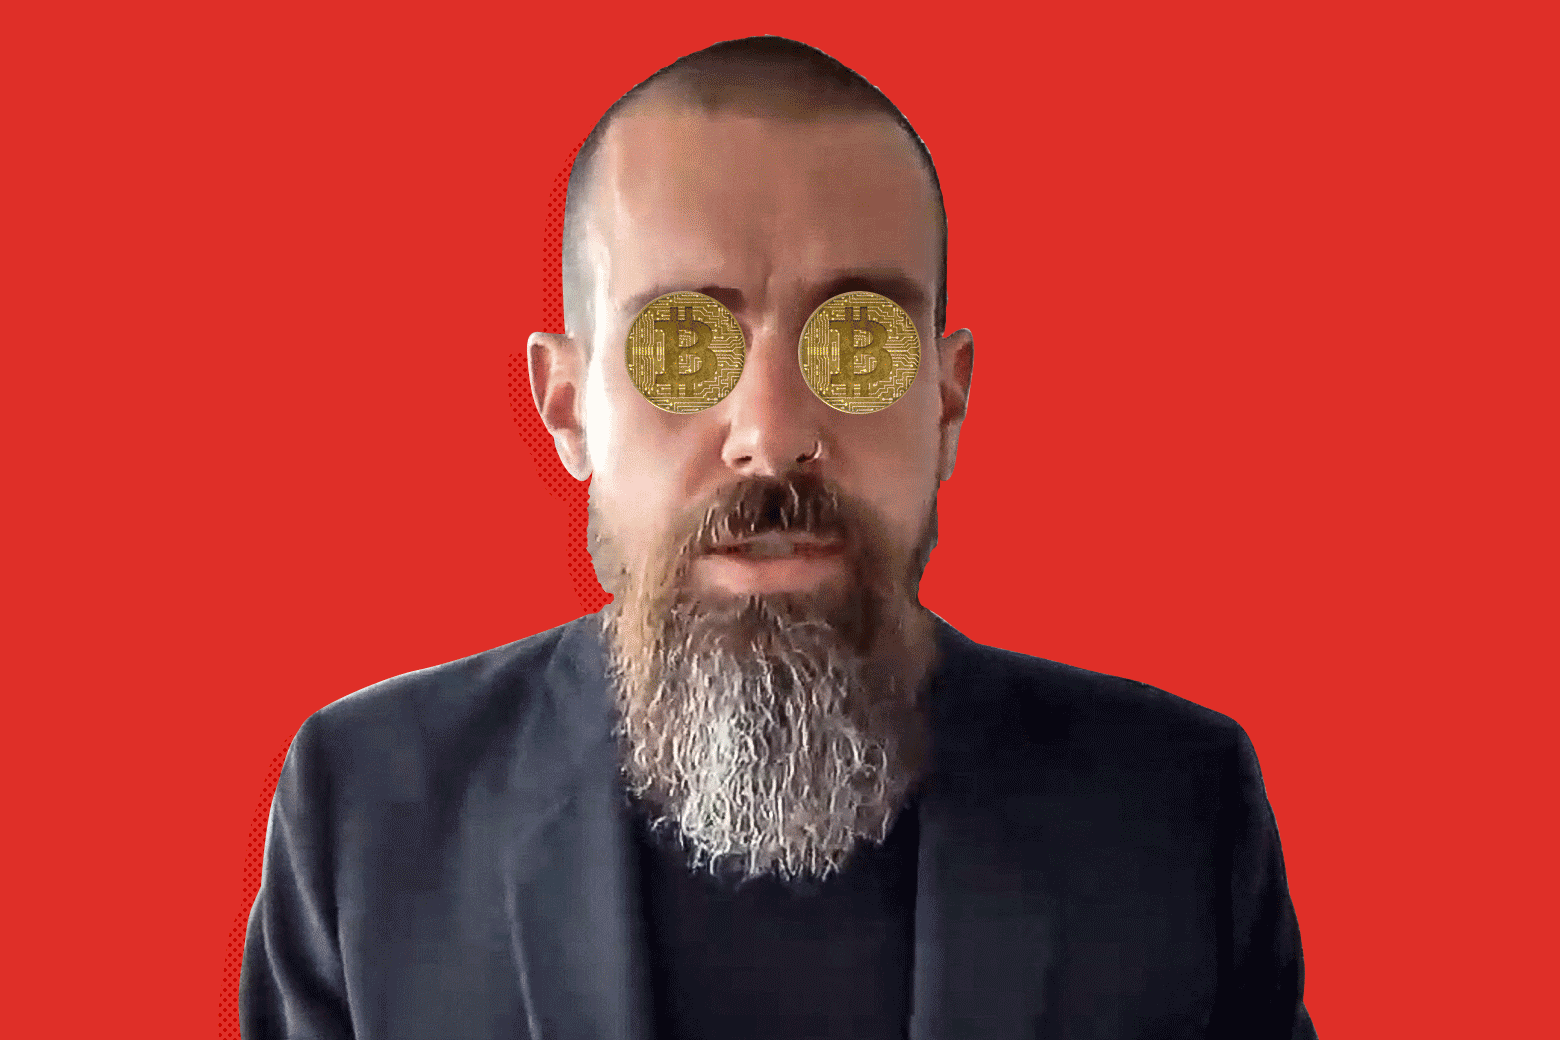 Animation of Jack Dorsey with Bitcoins over his eyes that change into red laser eyes